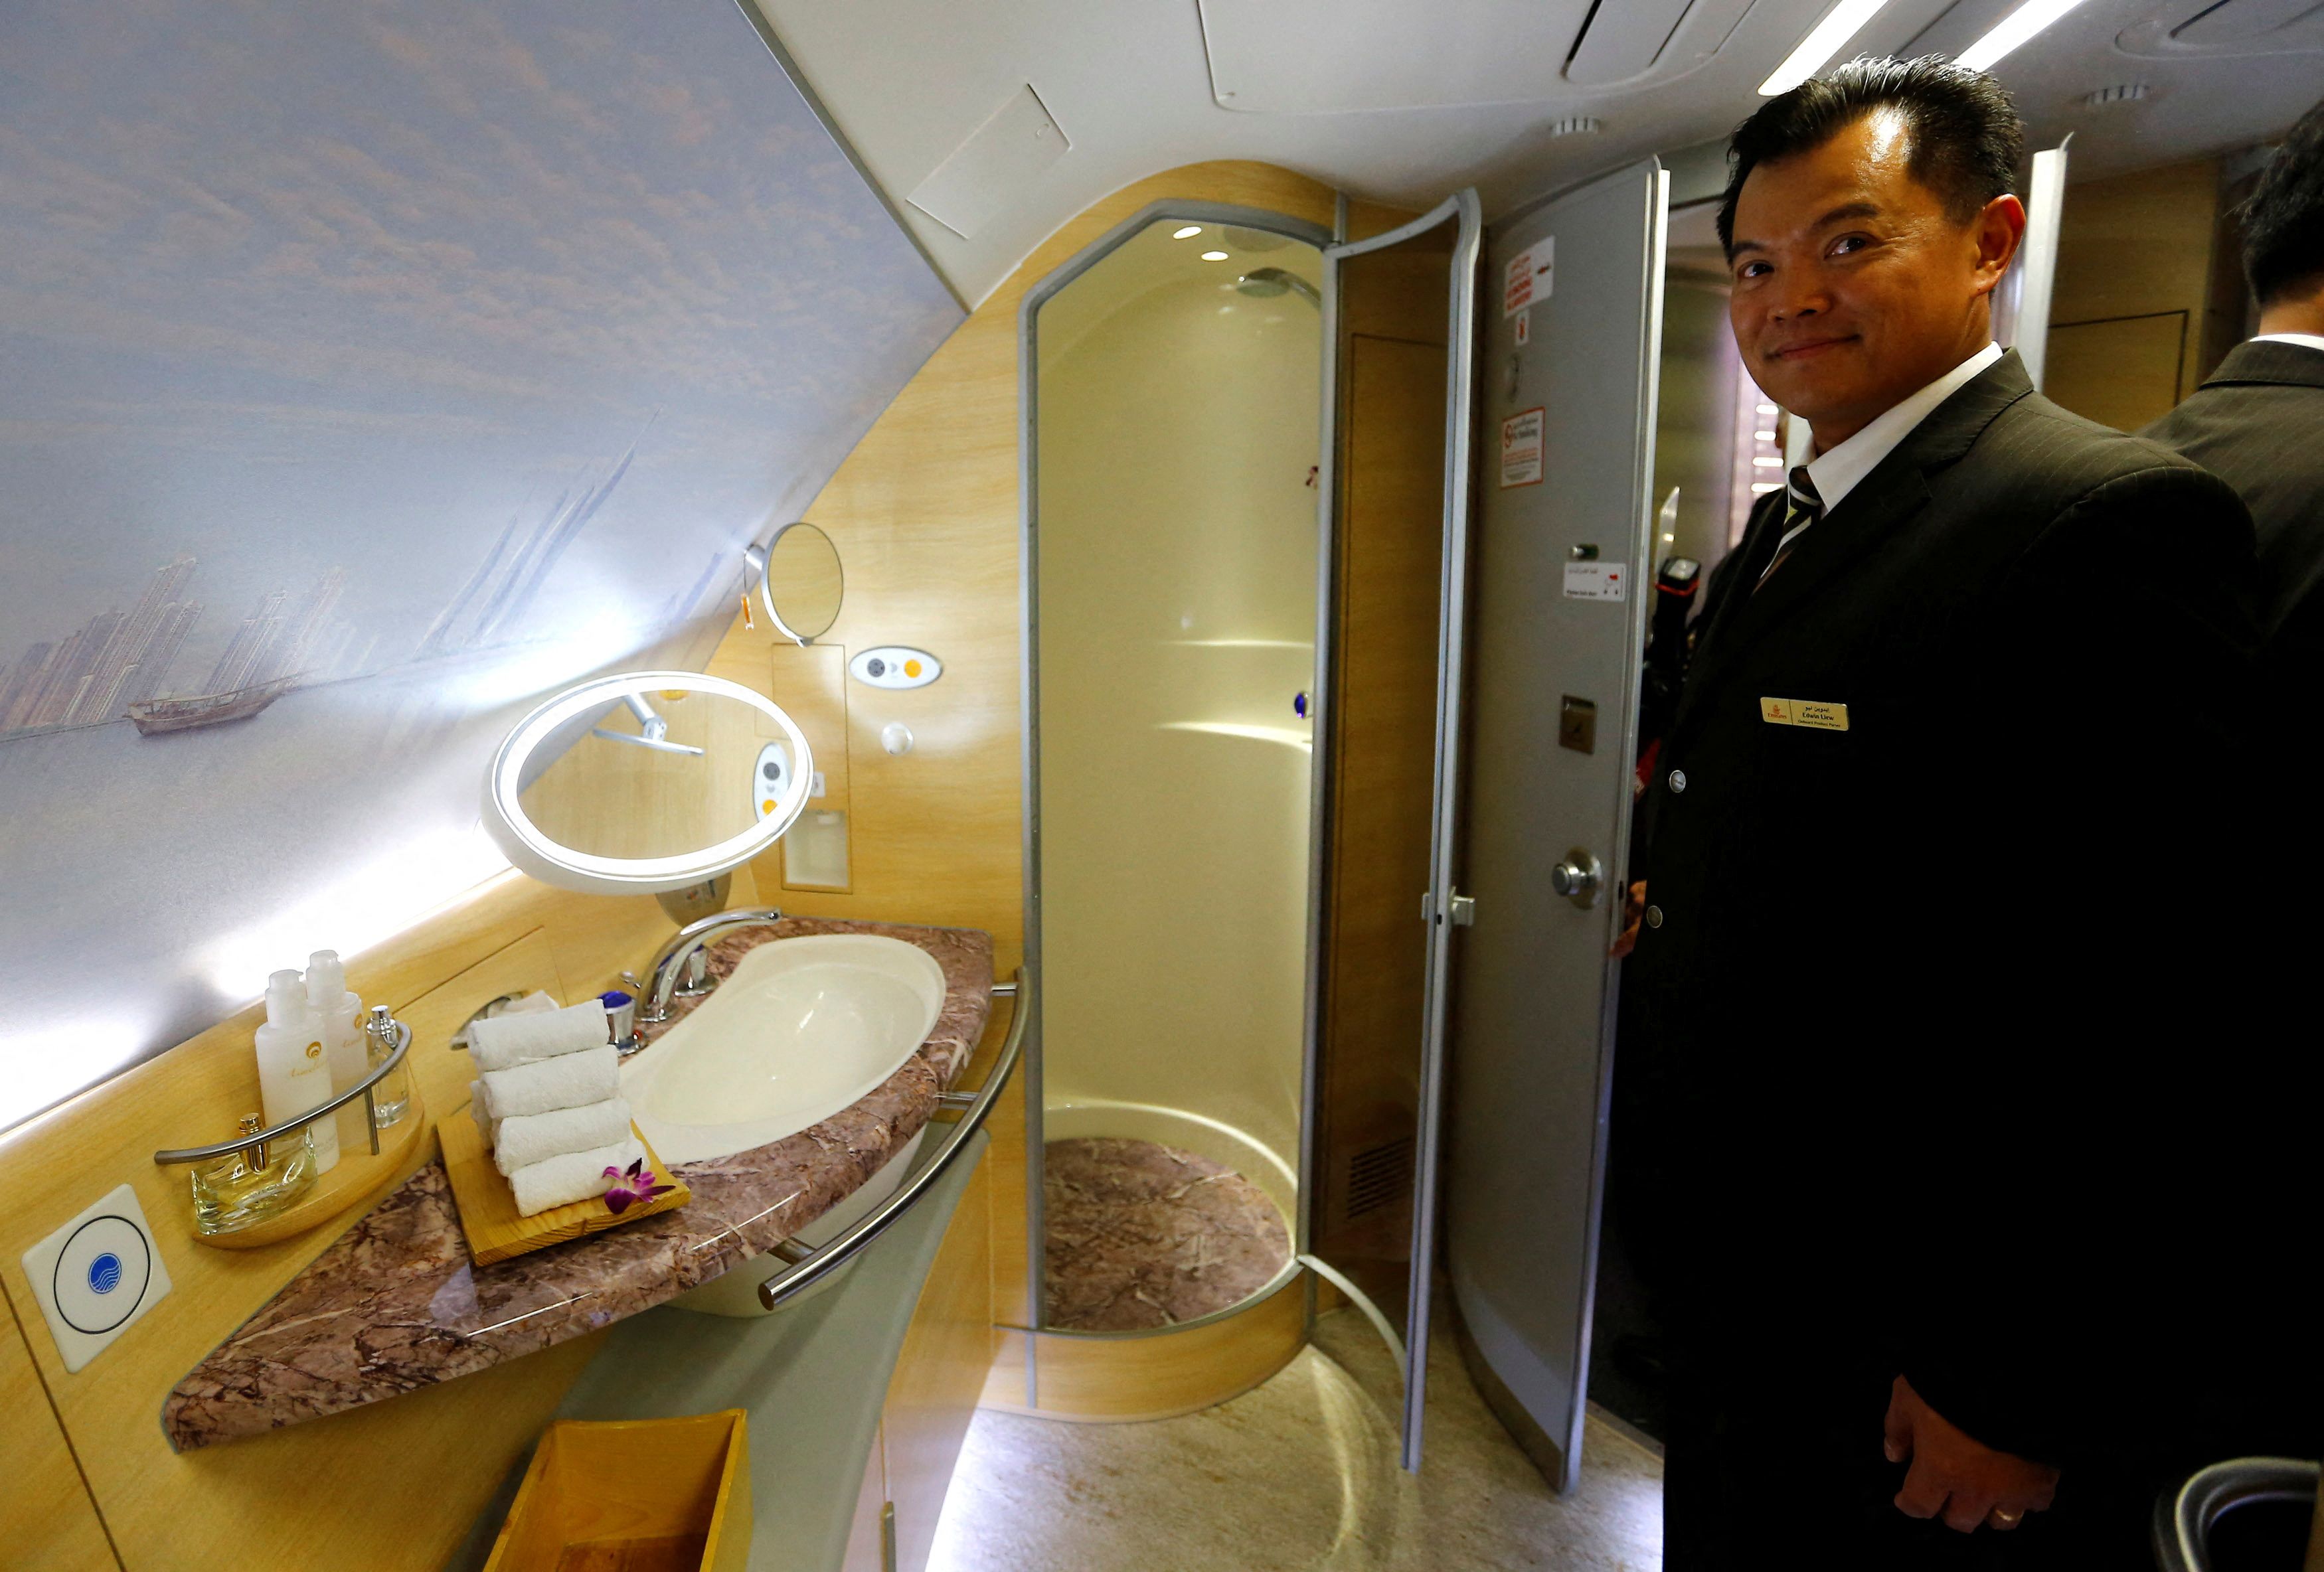 A flight attendant presents the spa area with a shower for first class passengers of United Arab Emirates air carrier Emirates after the first landing of an Emirates Airbus A380 in Frankfurt's airport